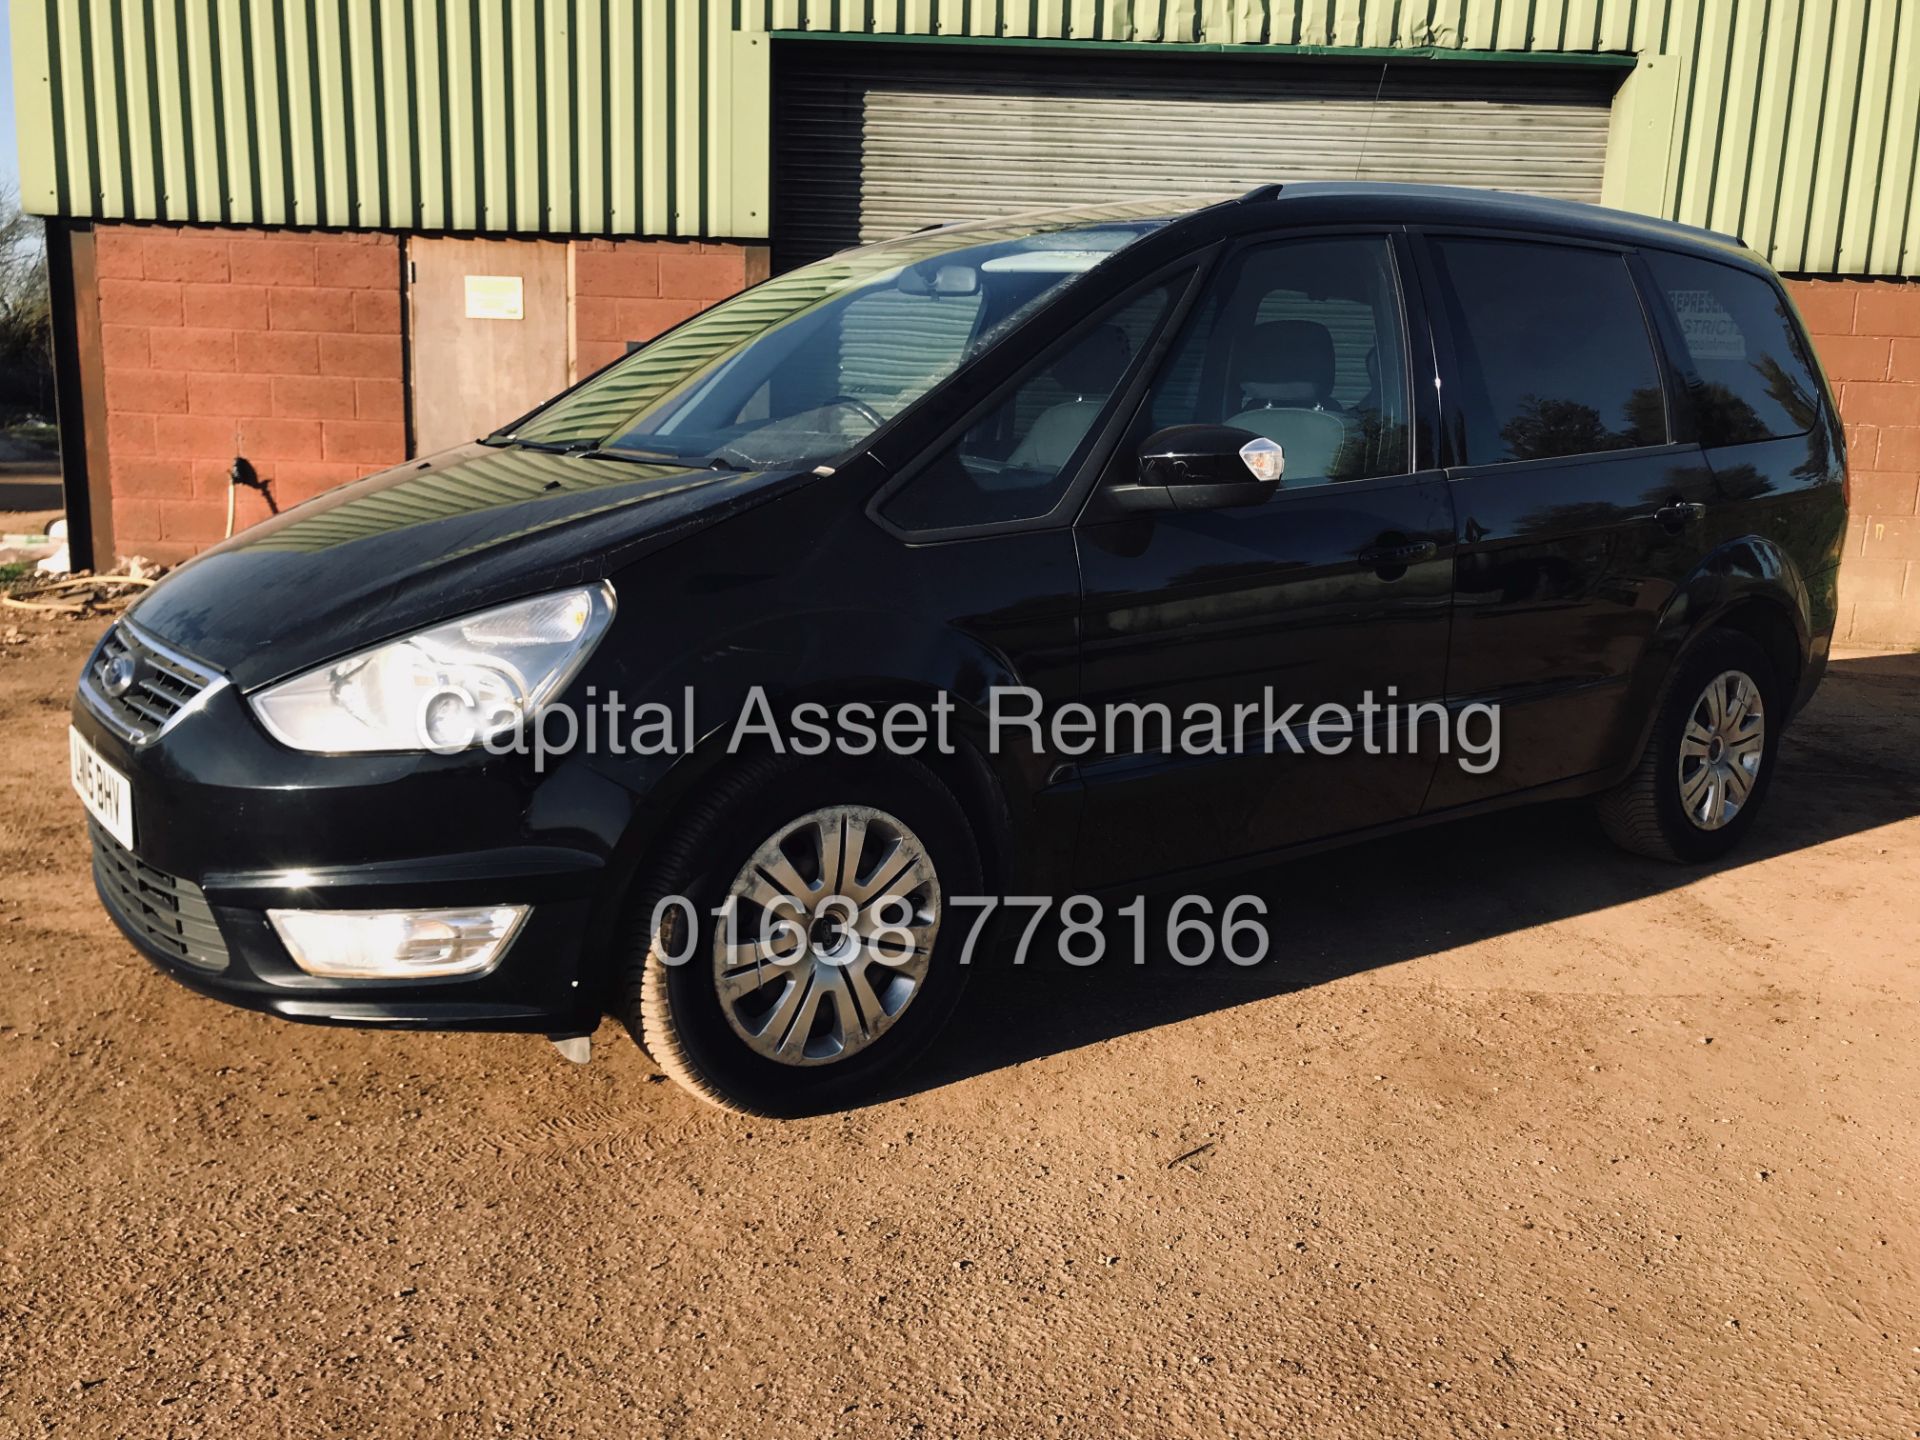 On Sale FORD GALAXY 2.0TDCI "ZETEC - POWERSHIFT" 7 SEATER (15 REG) AIR CON - 1 OWNER - 140BHP ENGINE